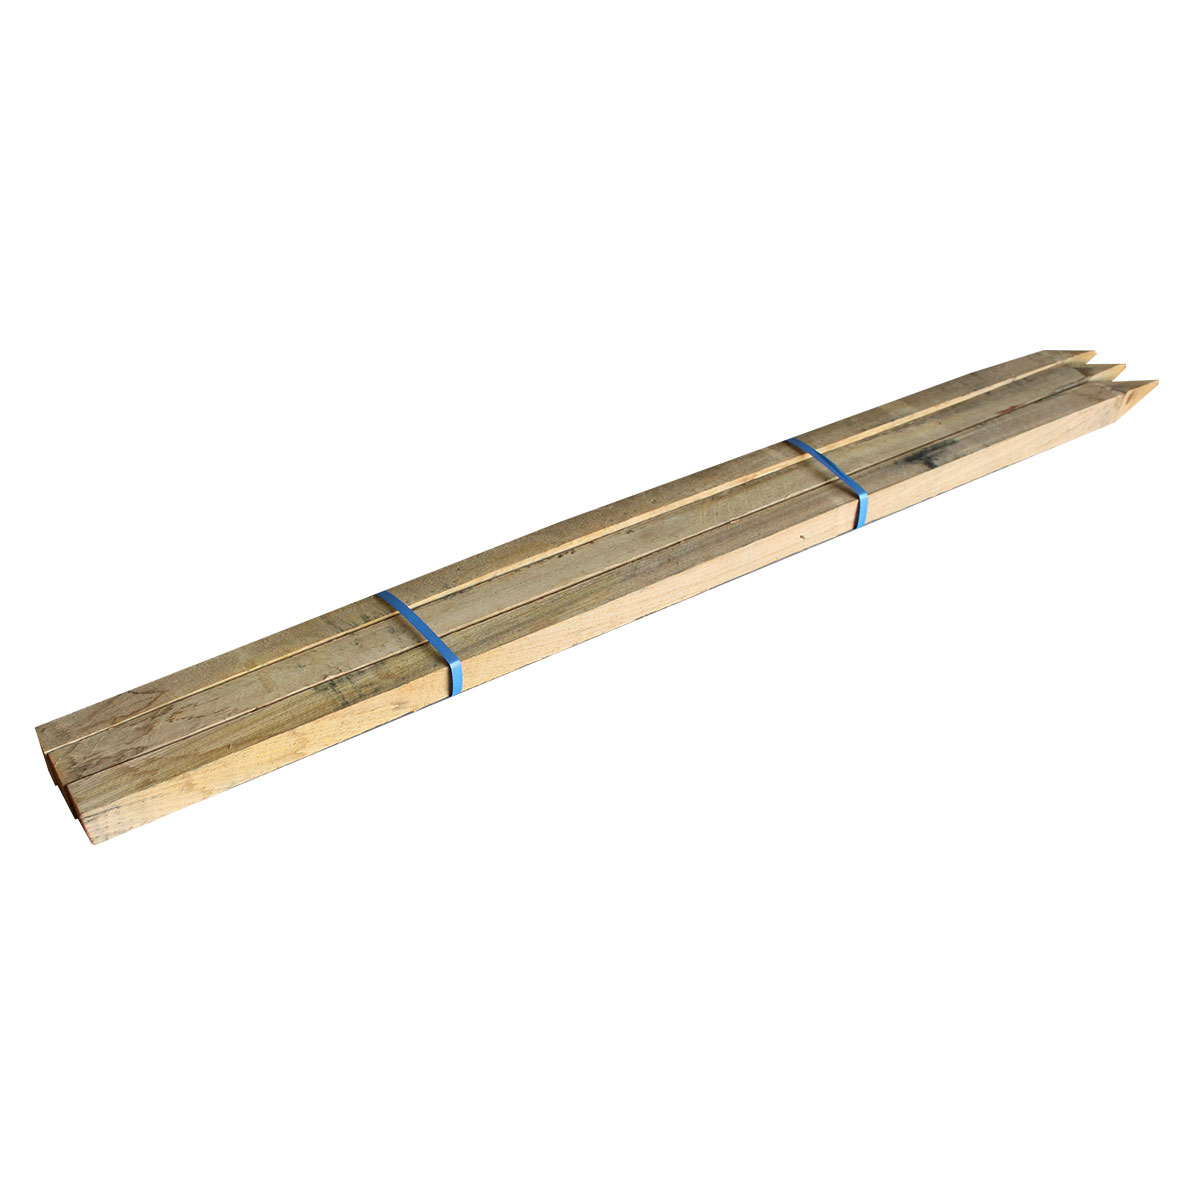 Hardwood Stakes 50 x 50 x 1500mm - 3 Pack